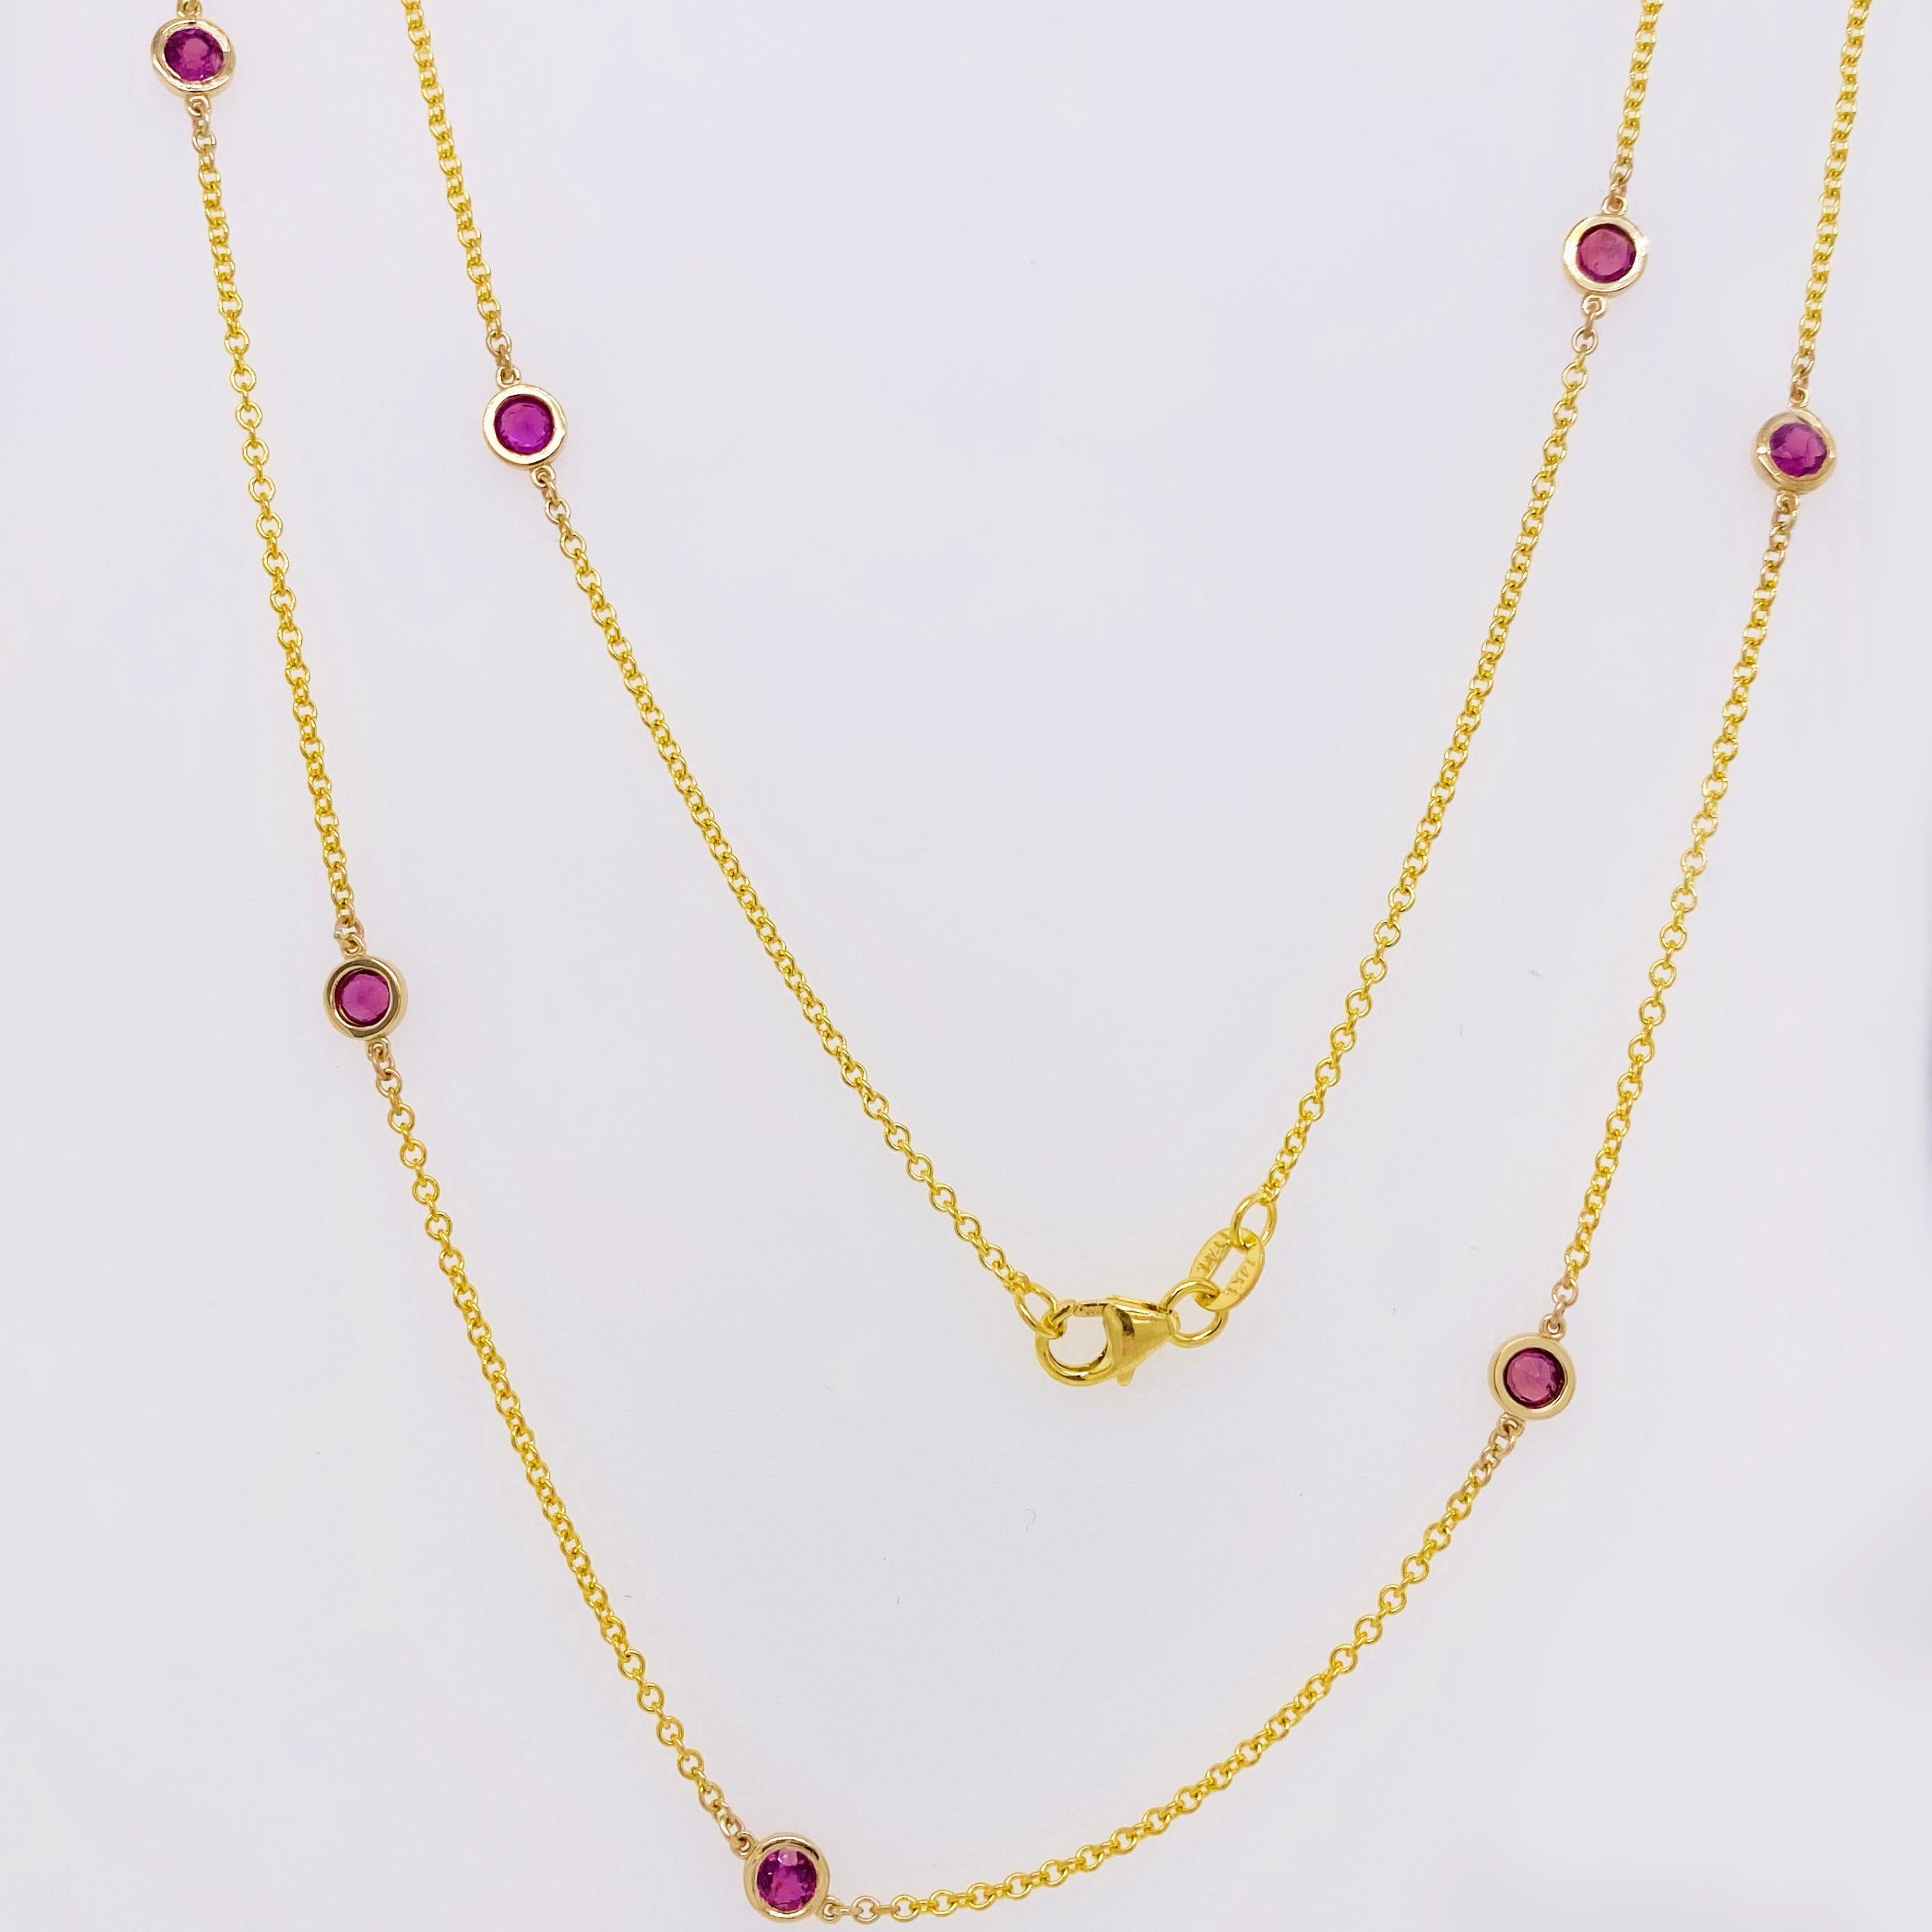 Modern Ruby Bezel Necklace, 14 Karat Gold, Rubies by the Yard Necklace, Ruby Chain